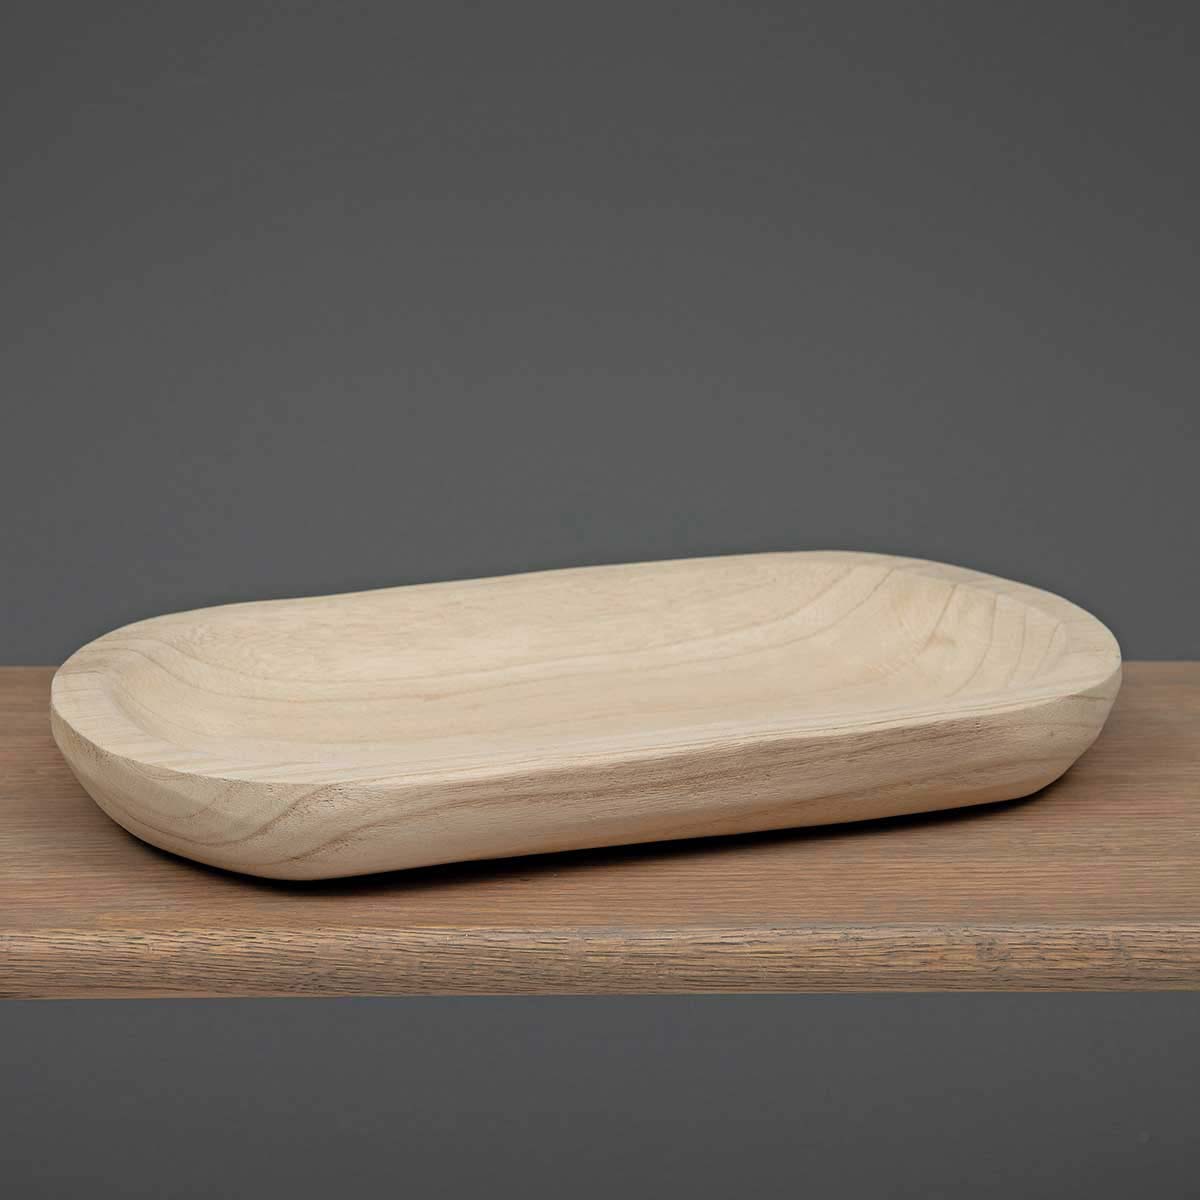 WOOD OVAL TRAY NATURAL WIDE 15.75"X8.5"X2" - Click Image to Close